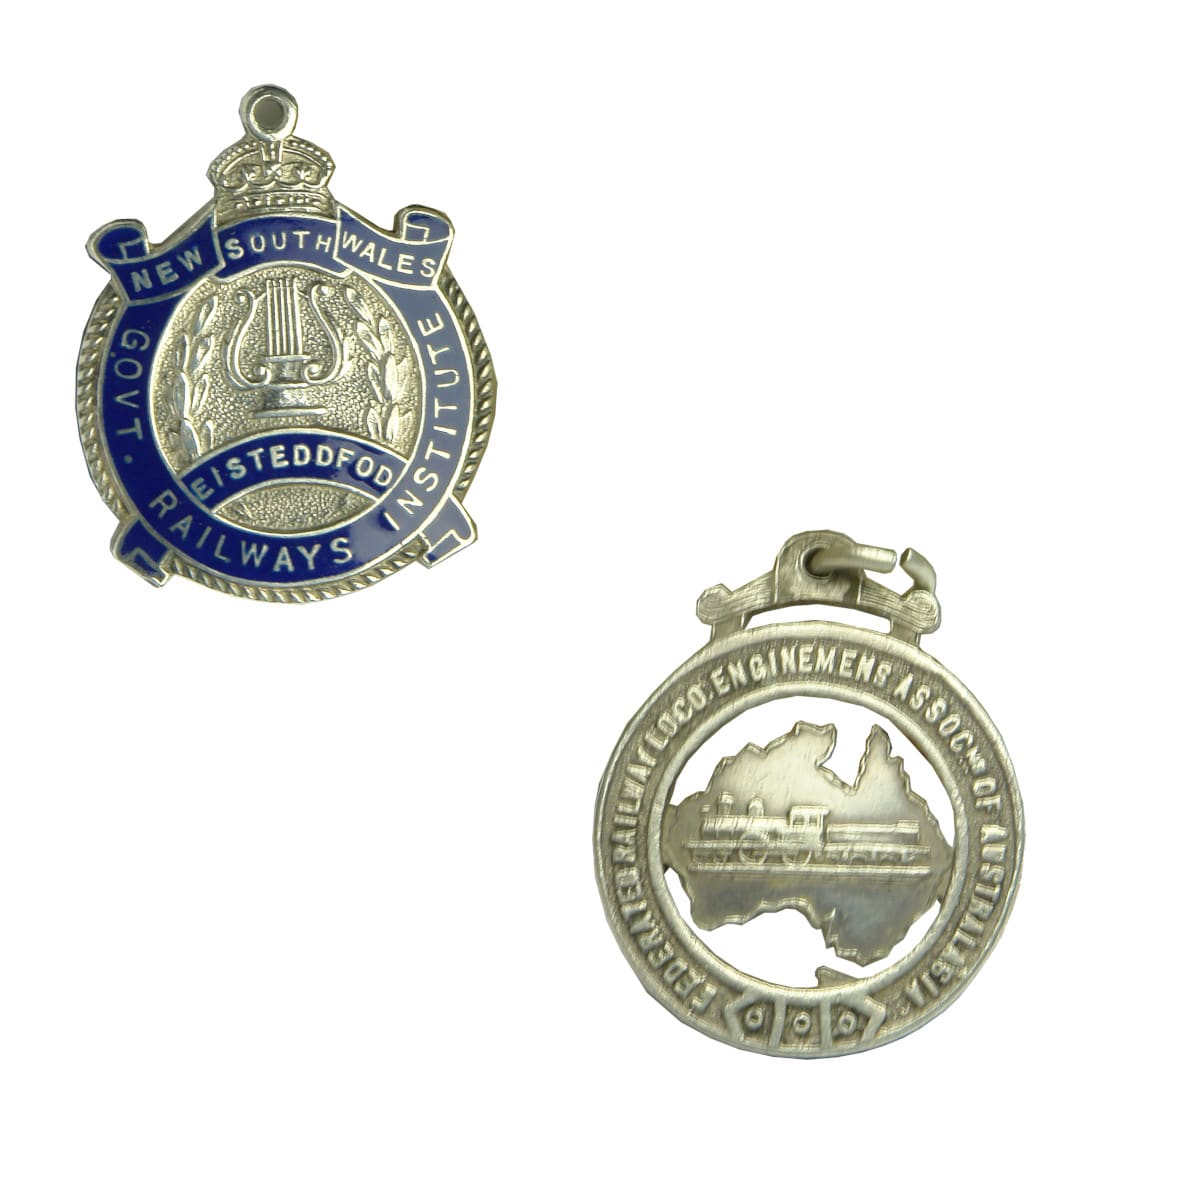 Two silver Railway related Badges: NSW Govt. Railways Institute Eisteddfod and Federated Railway Loco Enginemens Association.